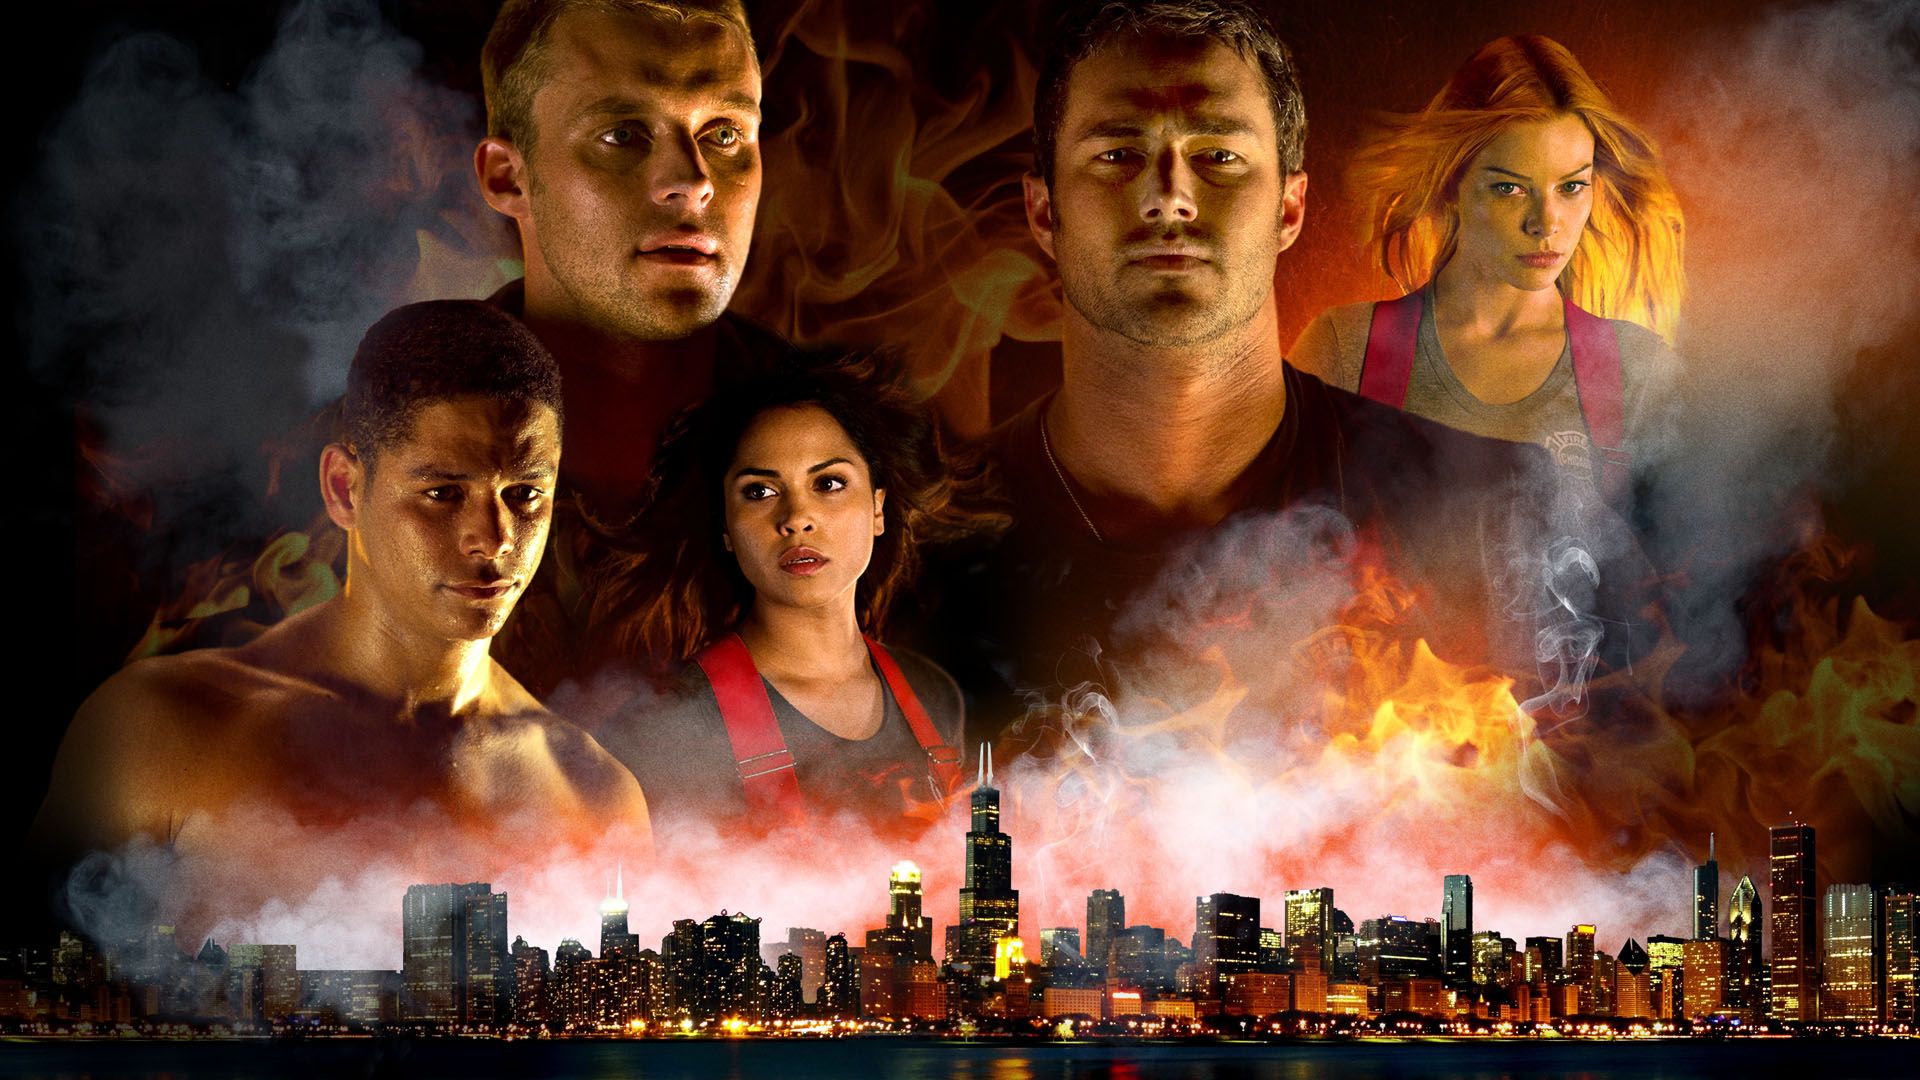 Chicago Fire Wallpaper High Resolution and Quality Download